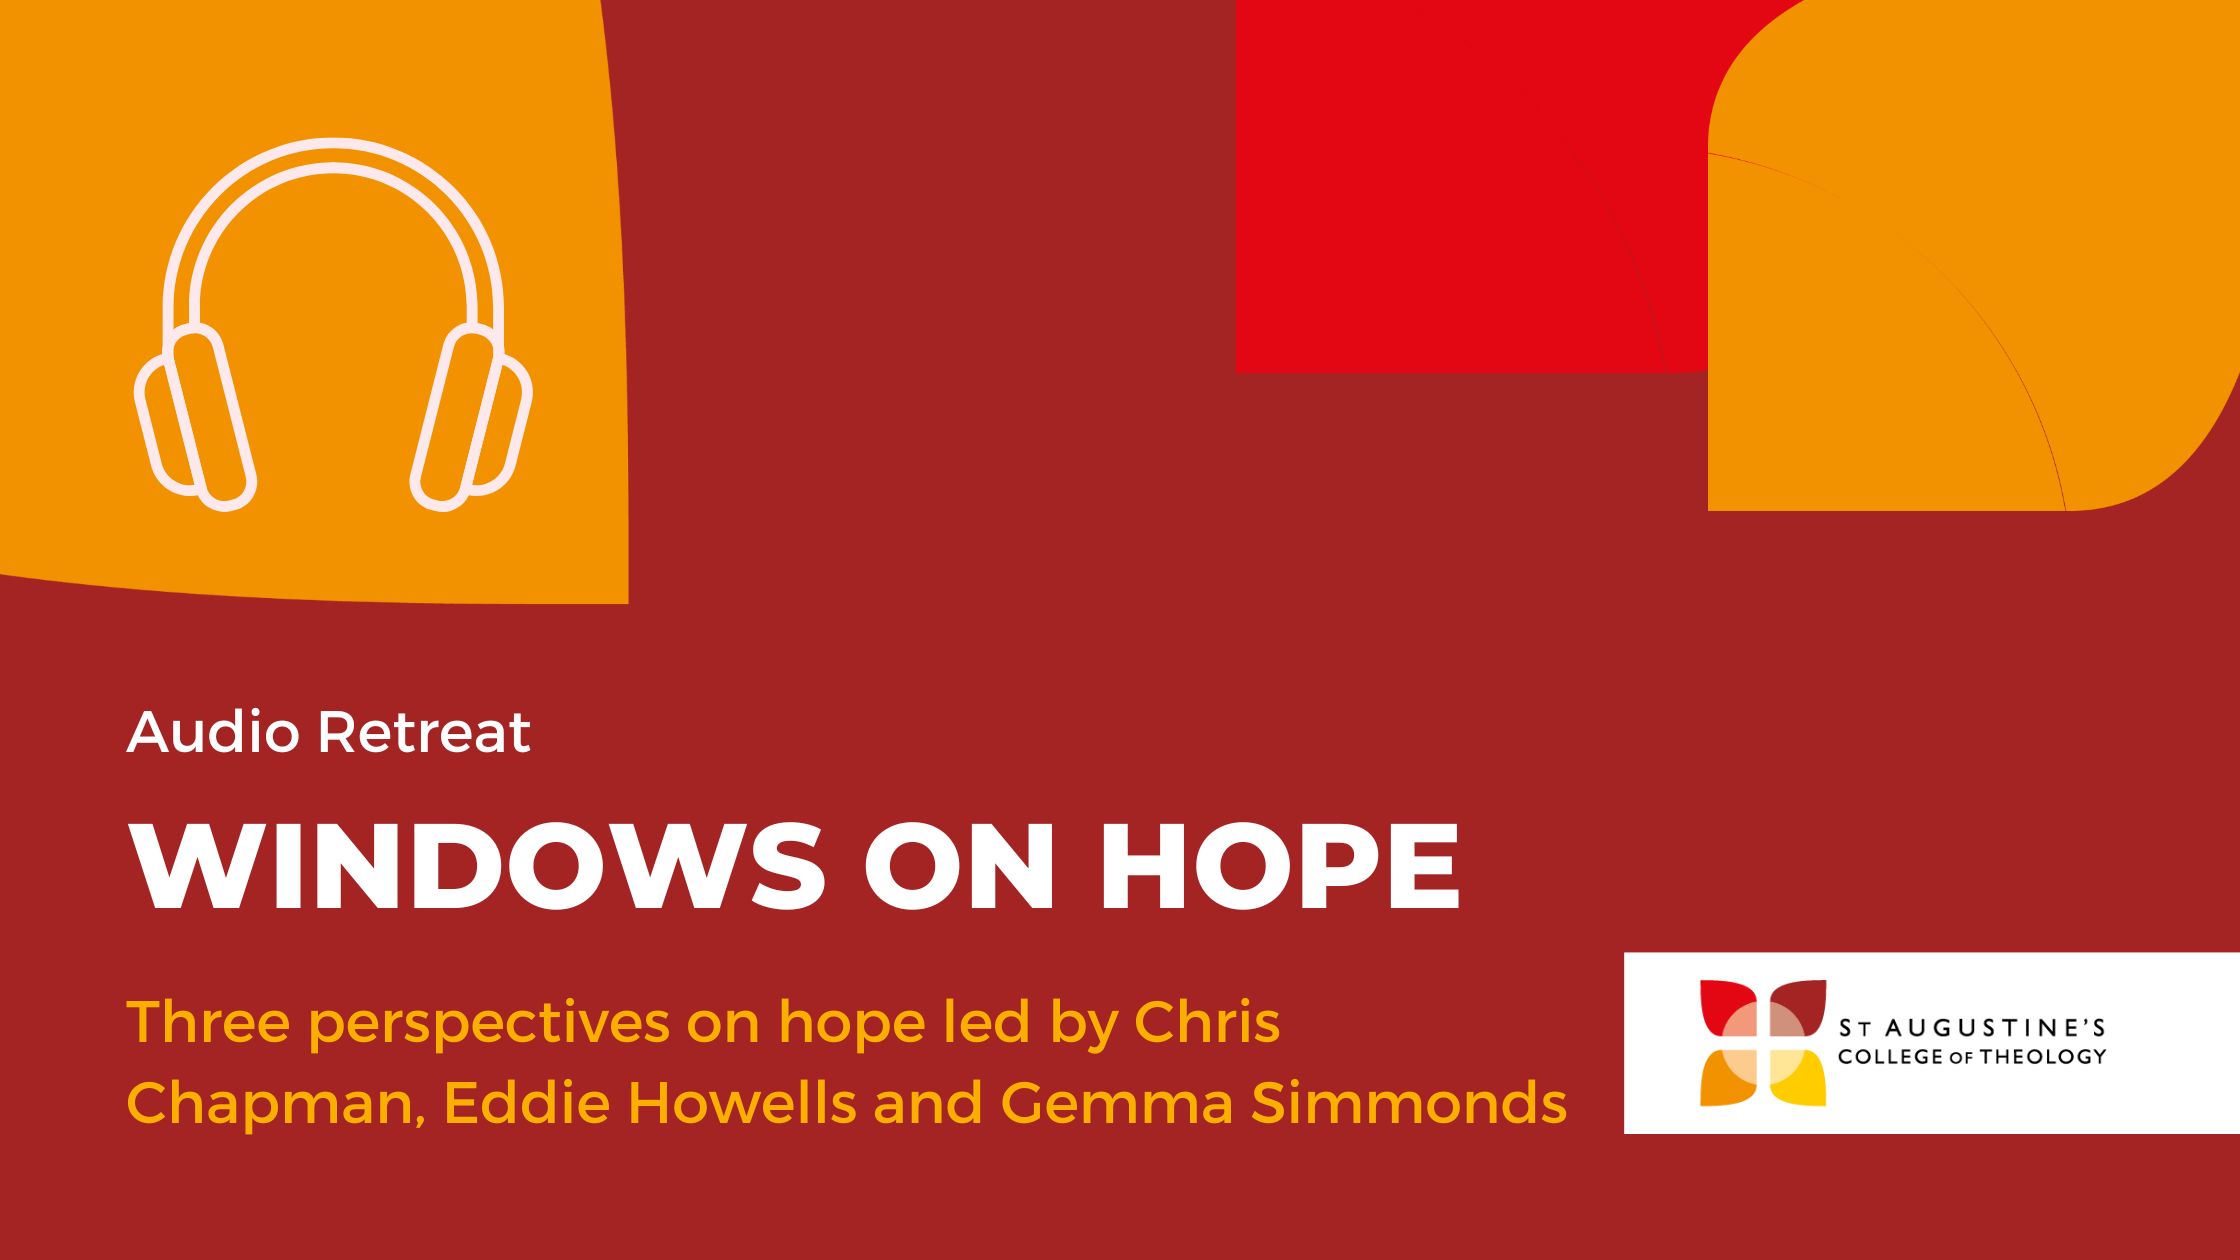 New online course – Windows on Hope begins 26 July